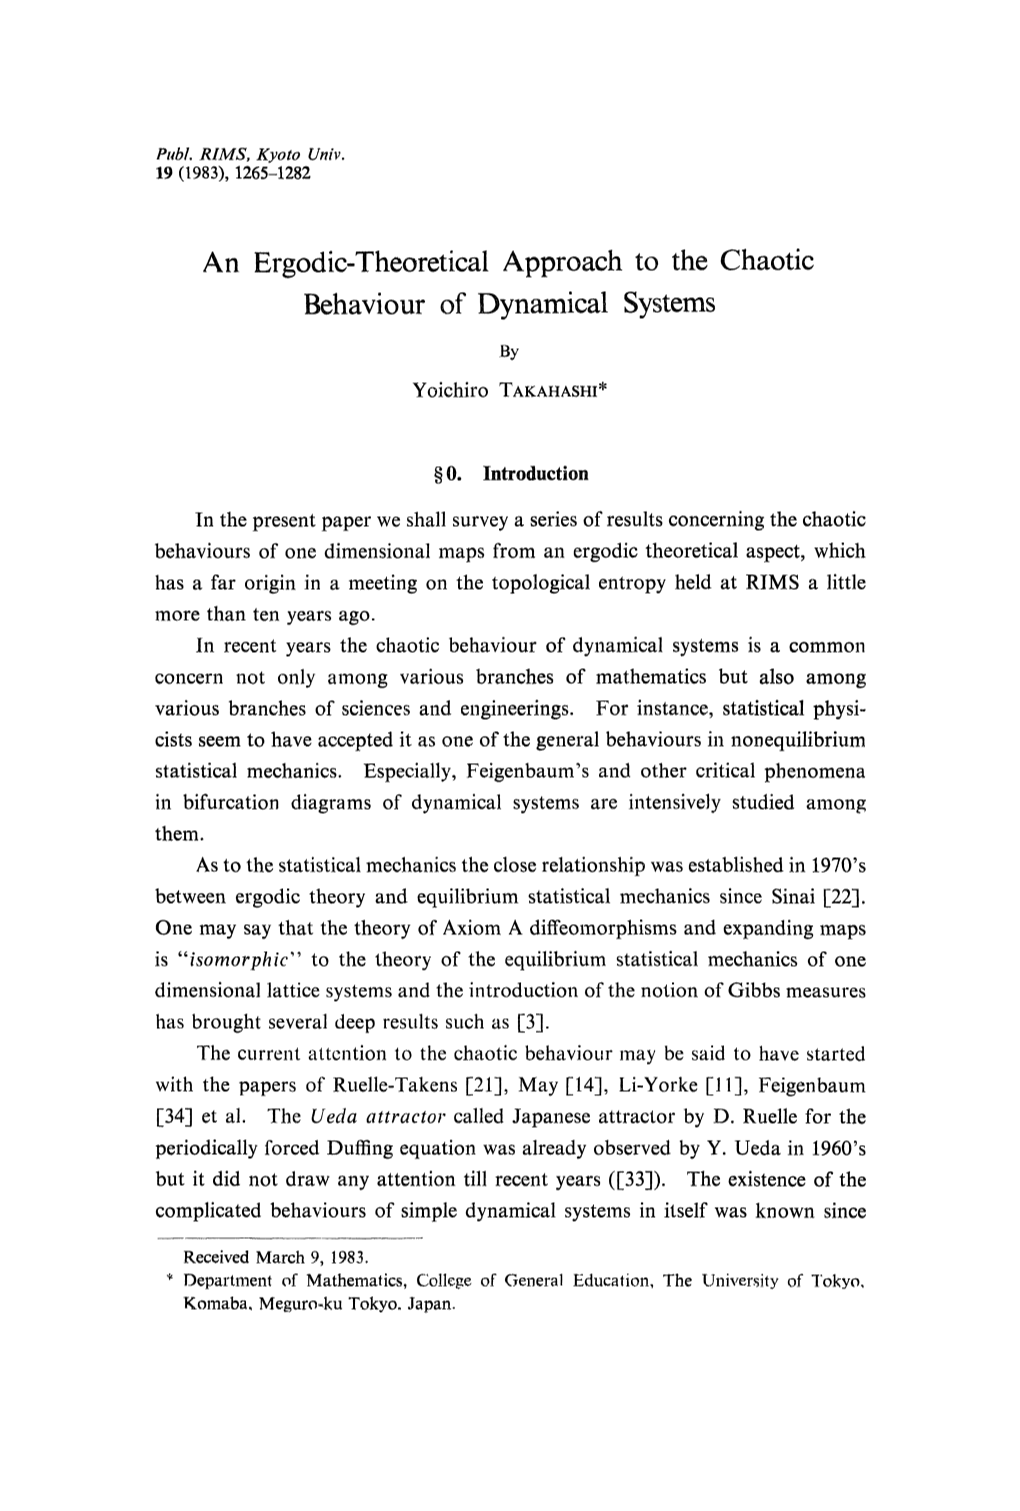 An Ergodic-Theoretical Approach to the Chaotic Behaviour of Dynamical Systems